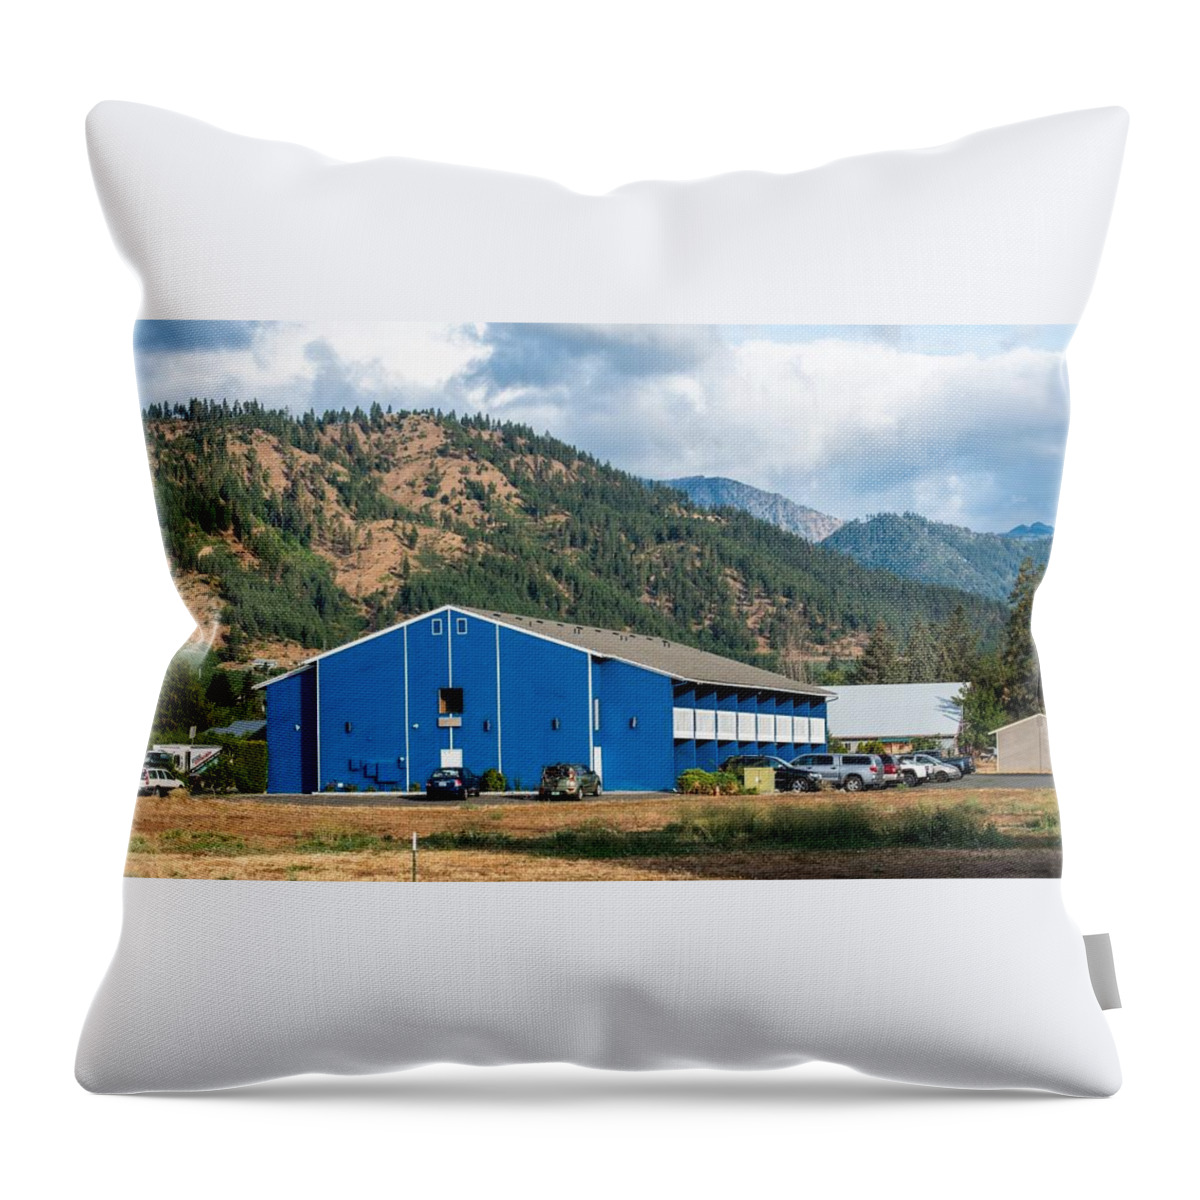 Wedge Mountain Inn And Foothills Throw Pillow featuring the photograph Wedge Mountain Inn and Foothills by Tom Cochran